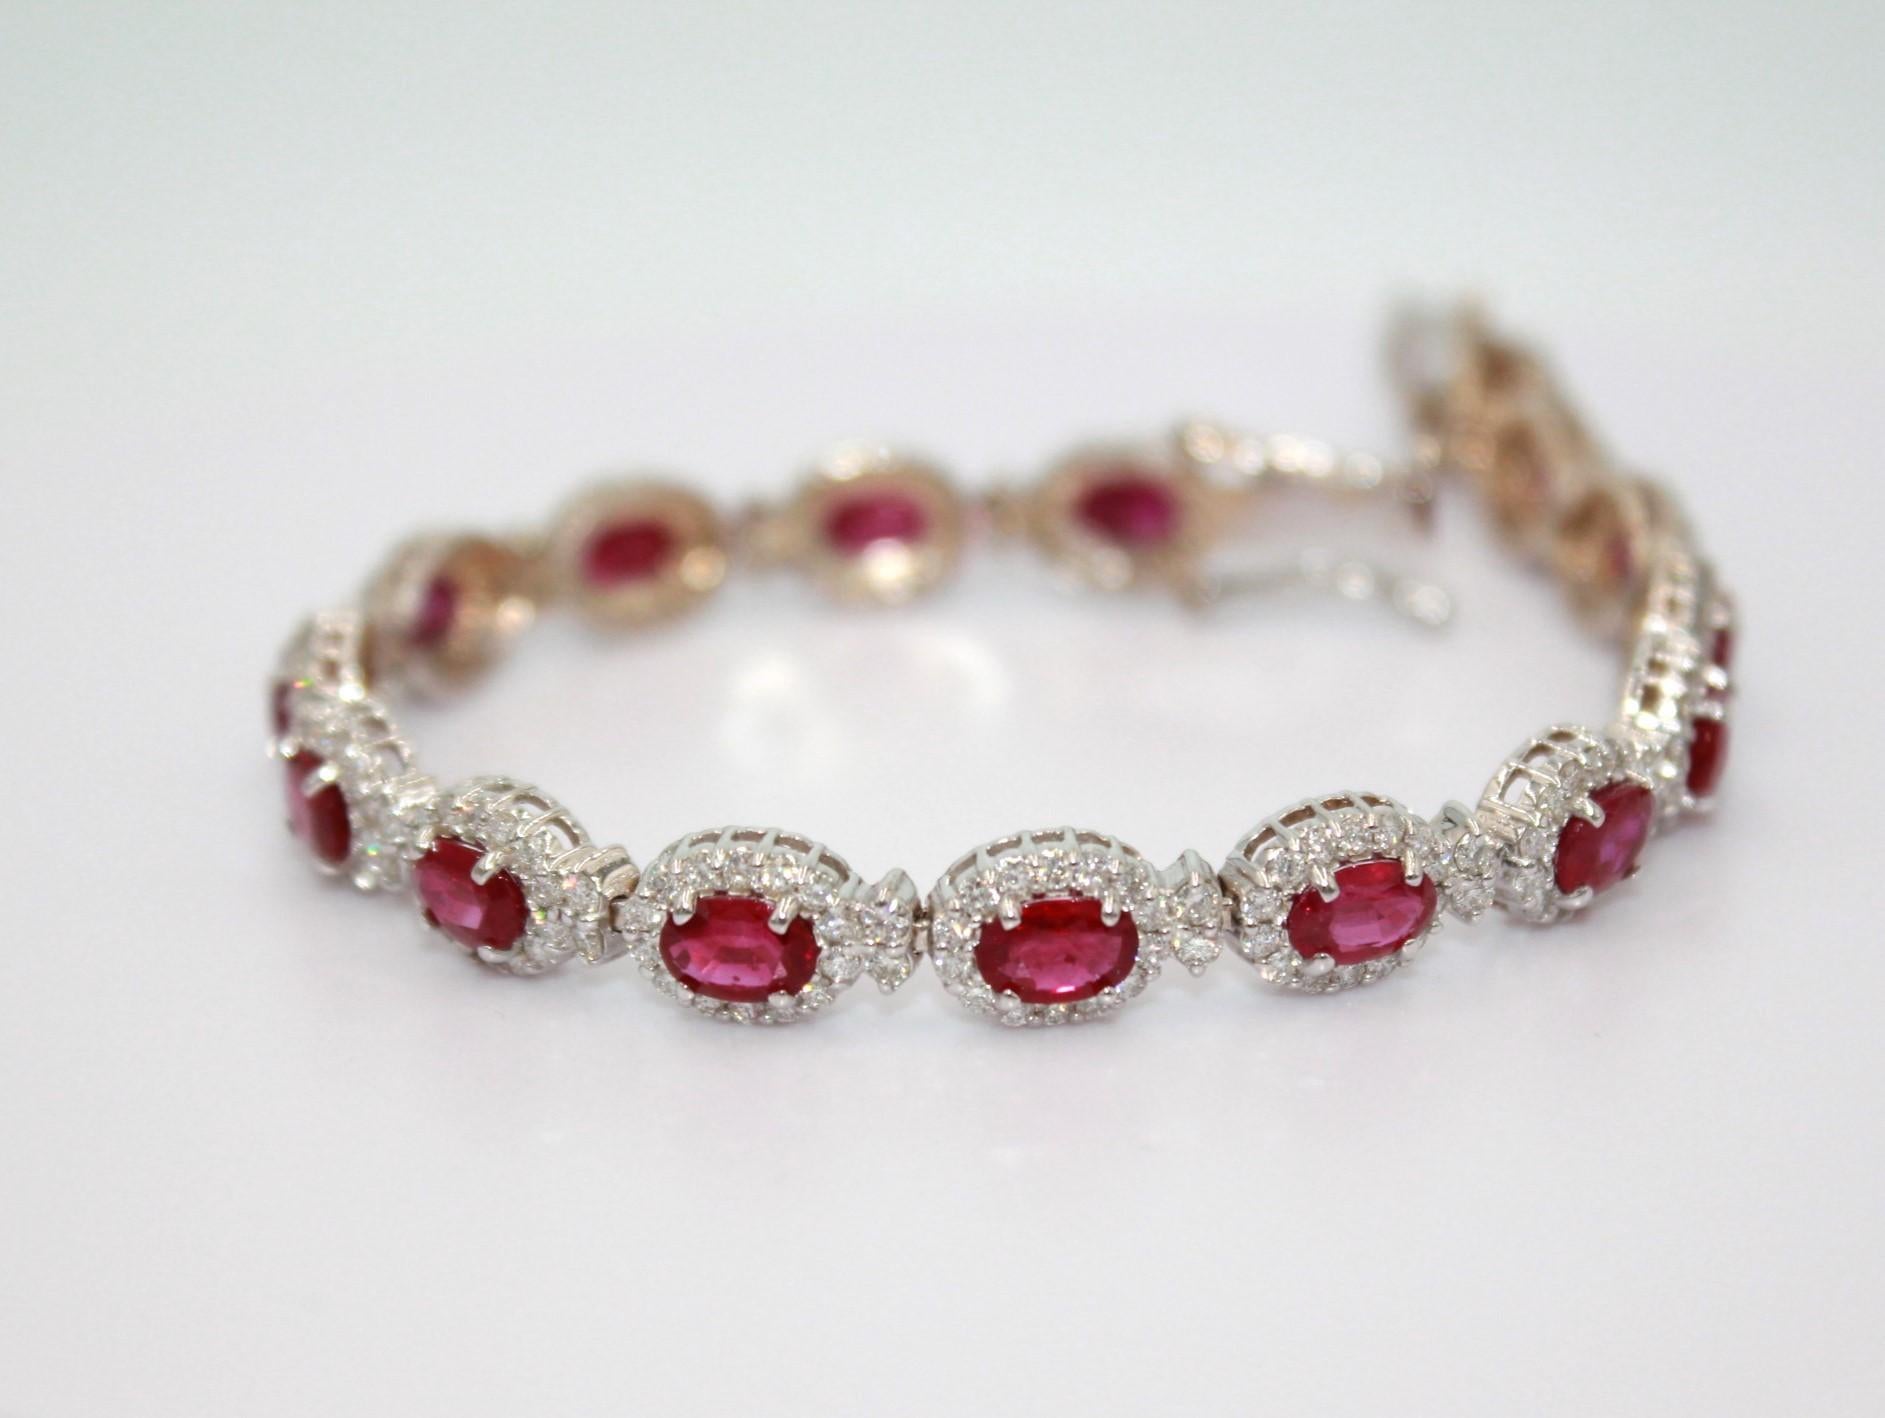 10.08 carats oval shaped Burma Ruby with 256 round diamonds, totaling a diamond weight of 3.24 carats. 

This gorgeous Ruby & Diamond Bracelet will highlight your uniqueness and elegance. 

Item Details:
- Type: Bracelet
- Metal: 18K Gold 
- Gram: